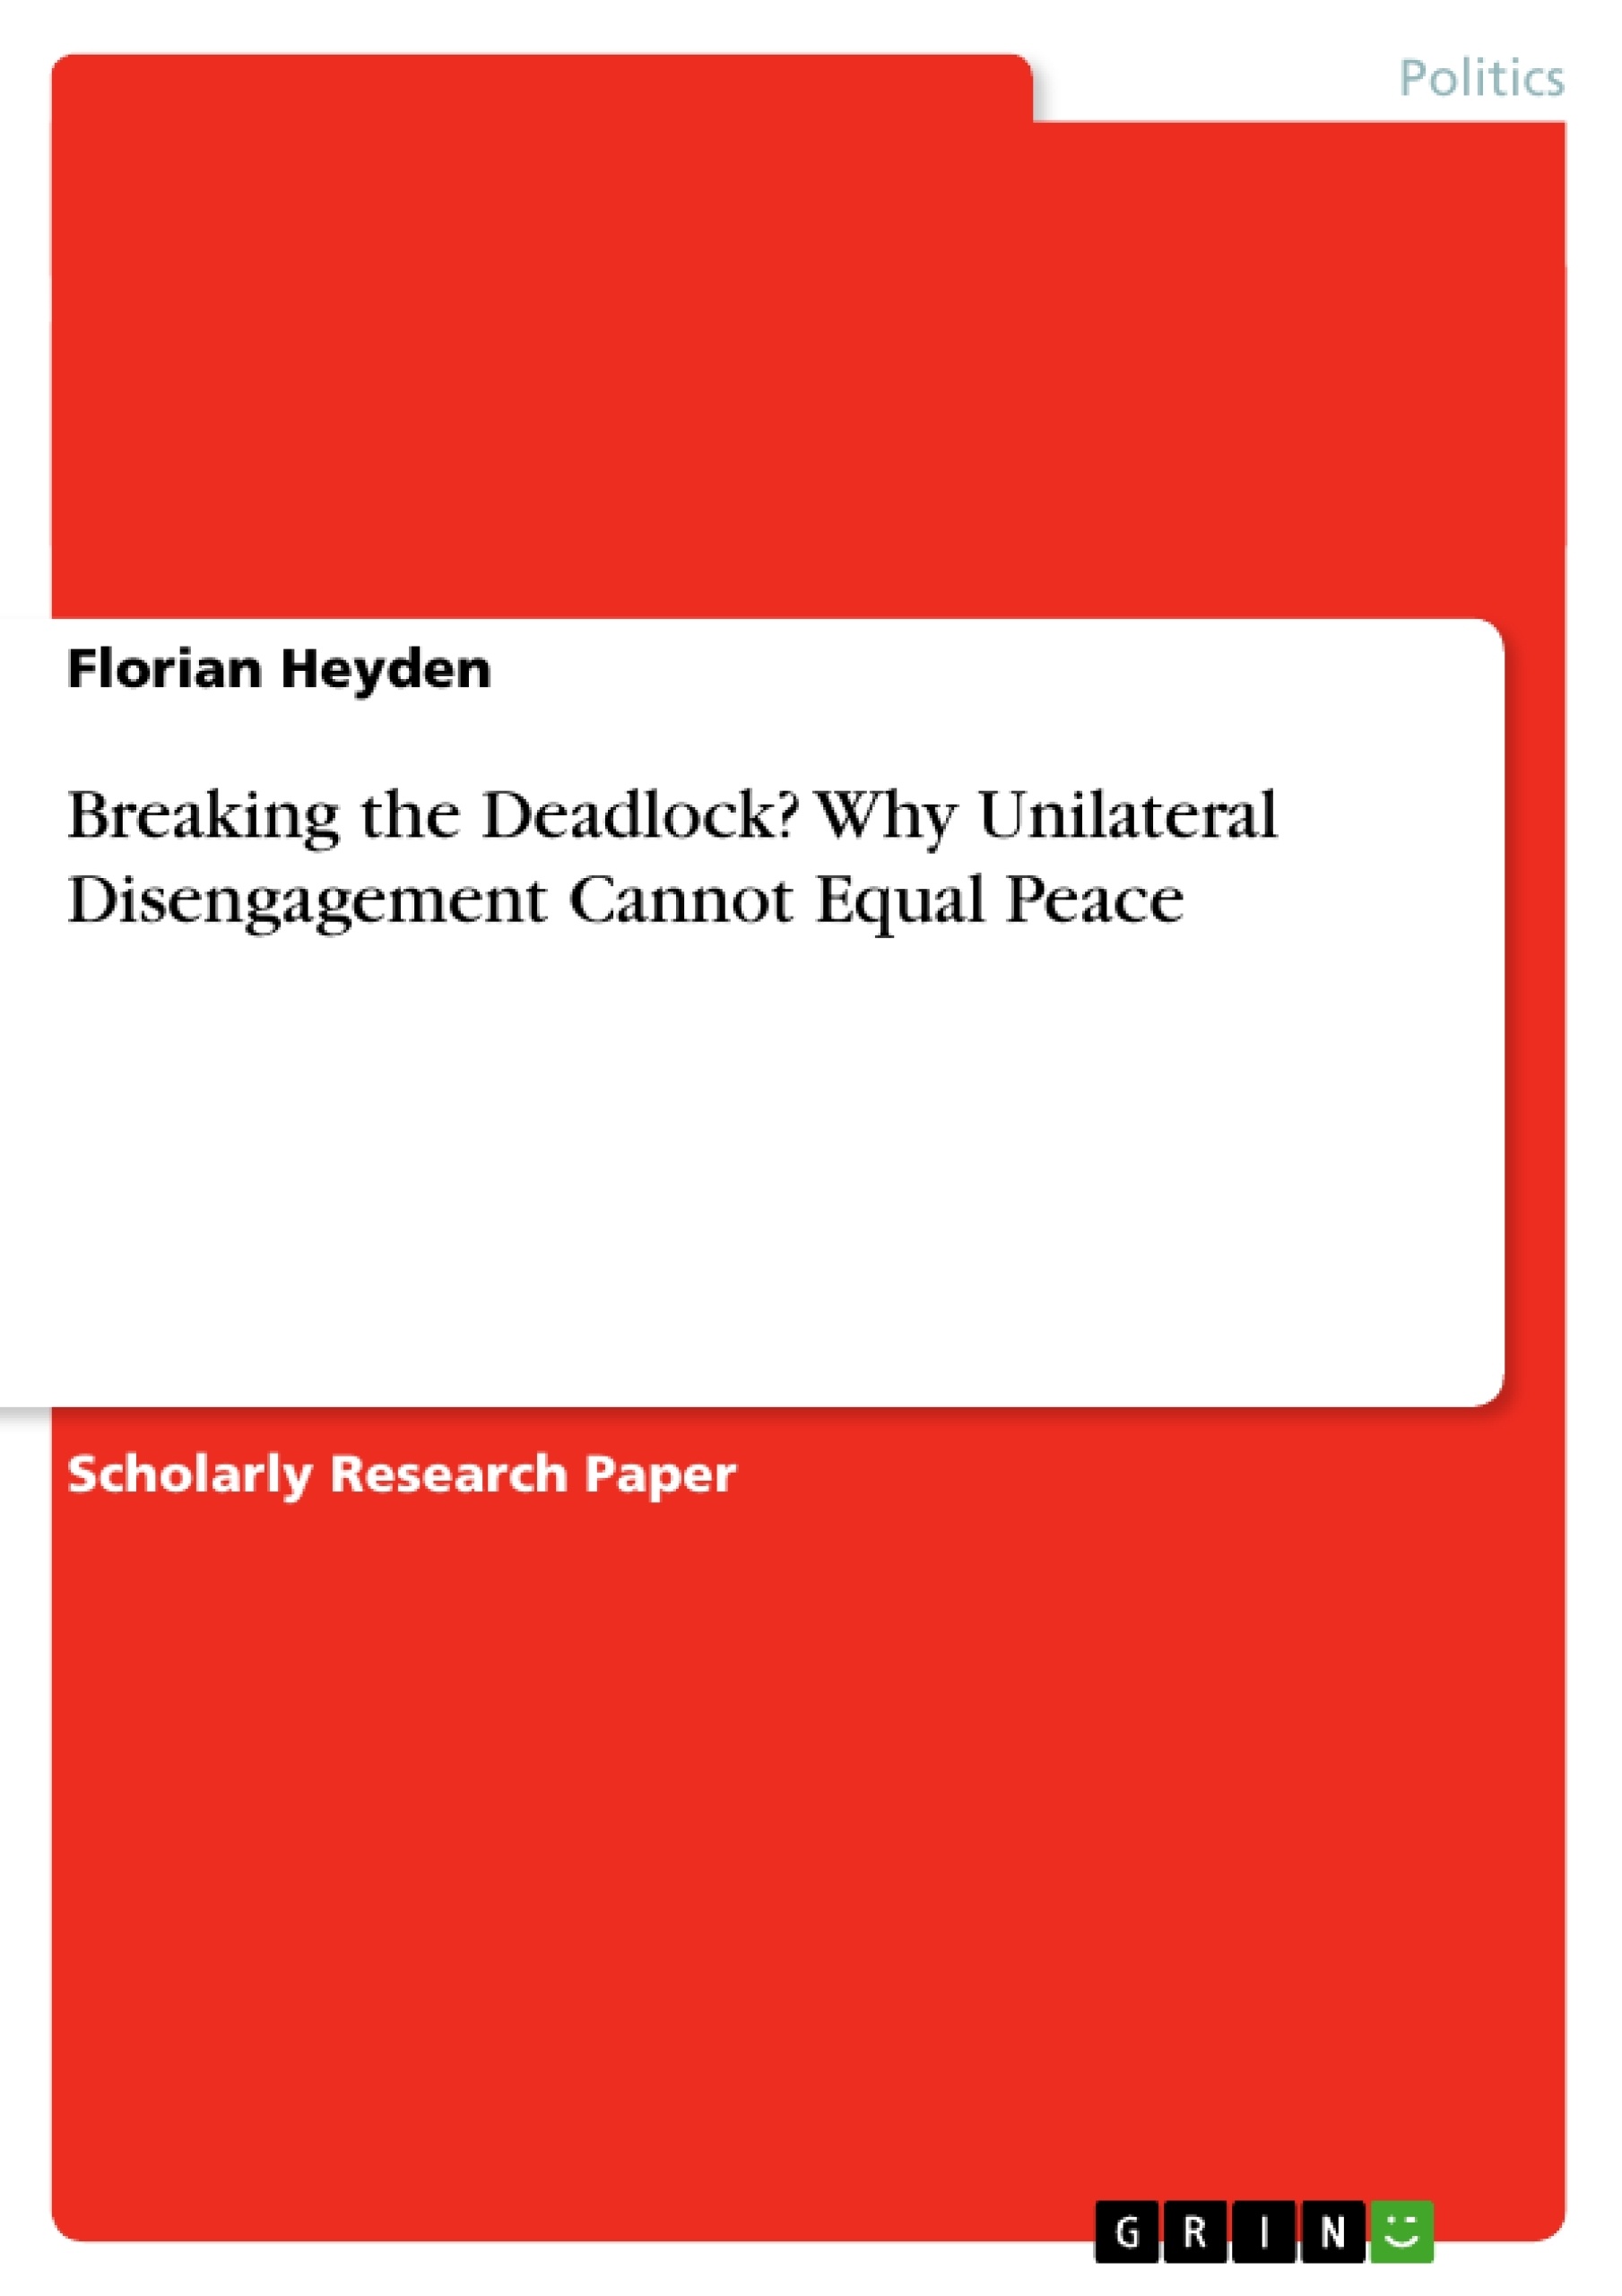 Titre: Breaking the Deadlock? Why Unilateral Disengagement Cannot Equal Peace